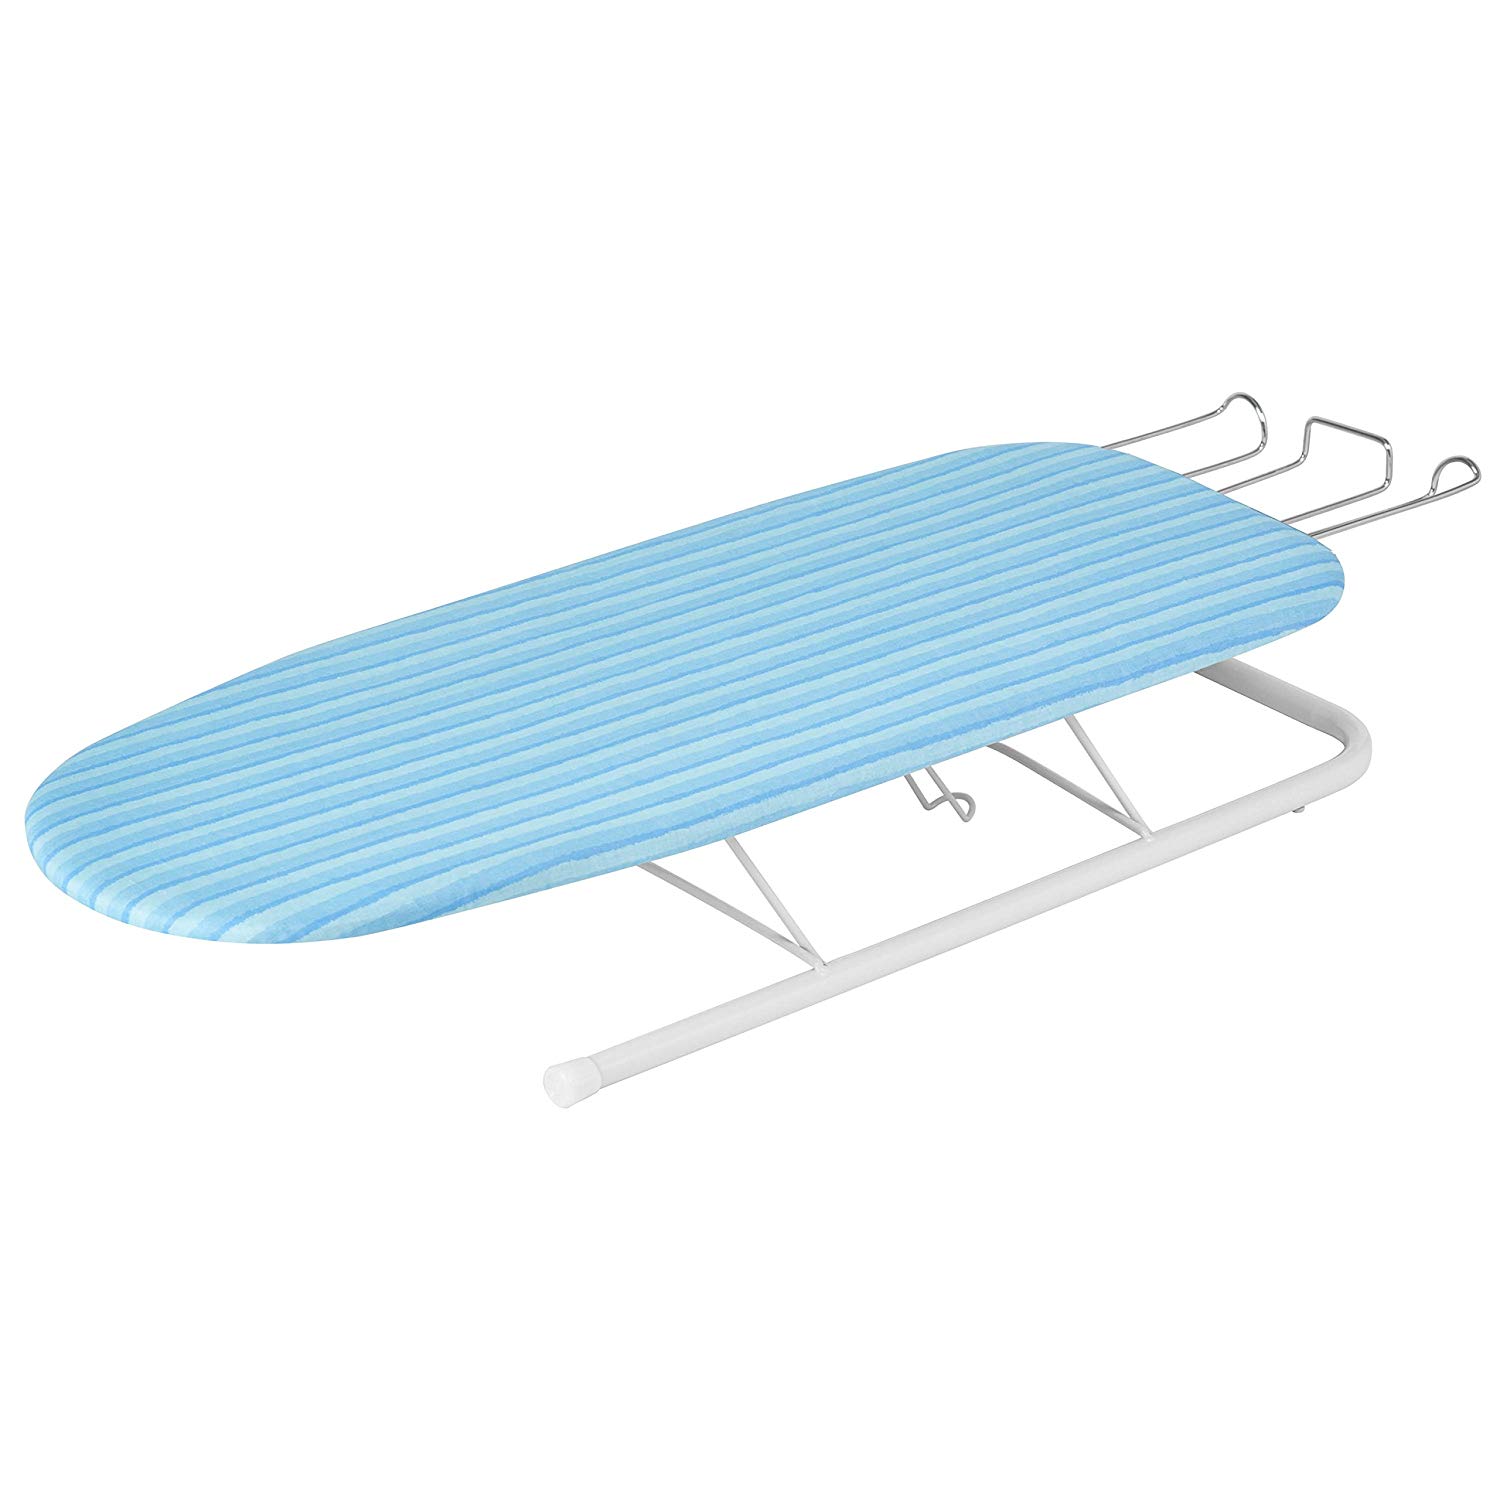 Ironing Board With Retractable Iron Rest